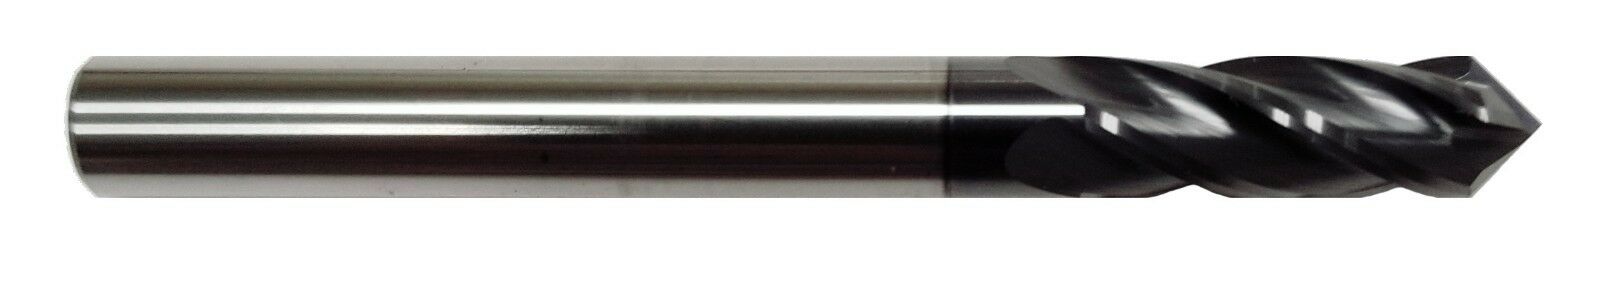 1/4" 4 Flute 90 Degree Carbide Drill Mill - Tialn Coated